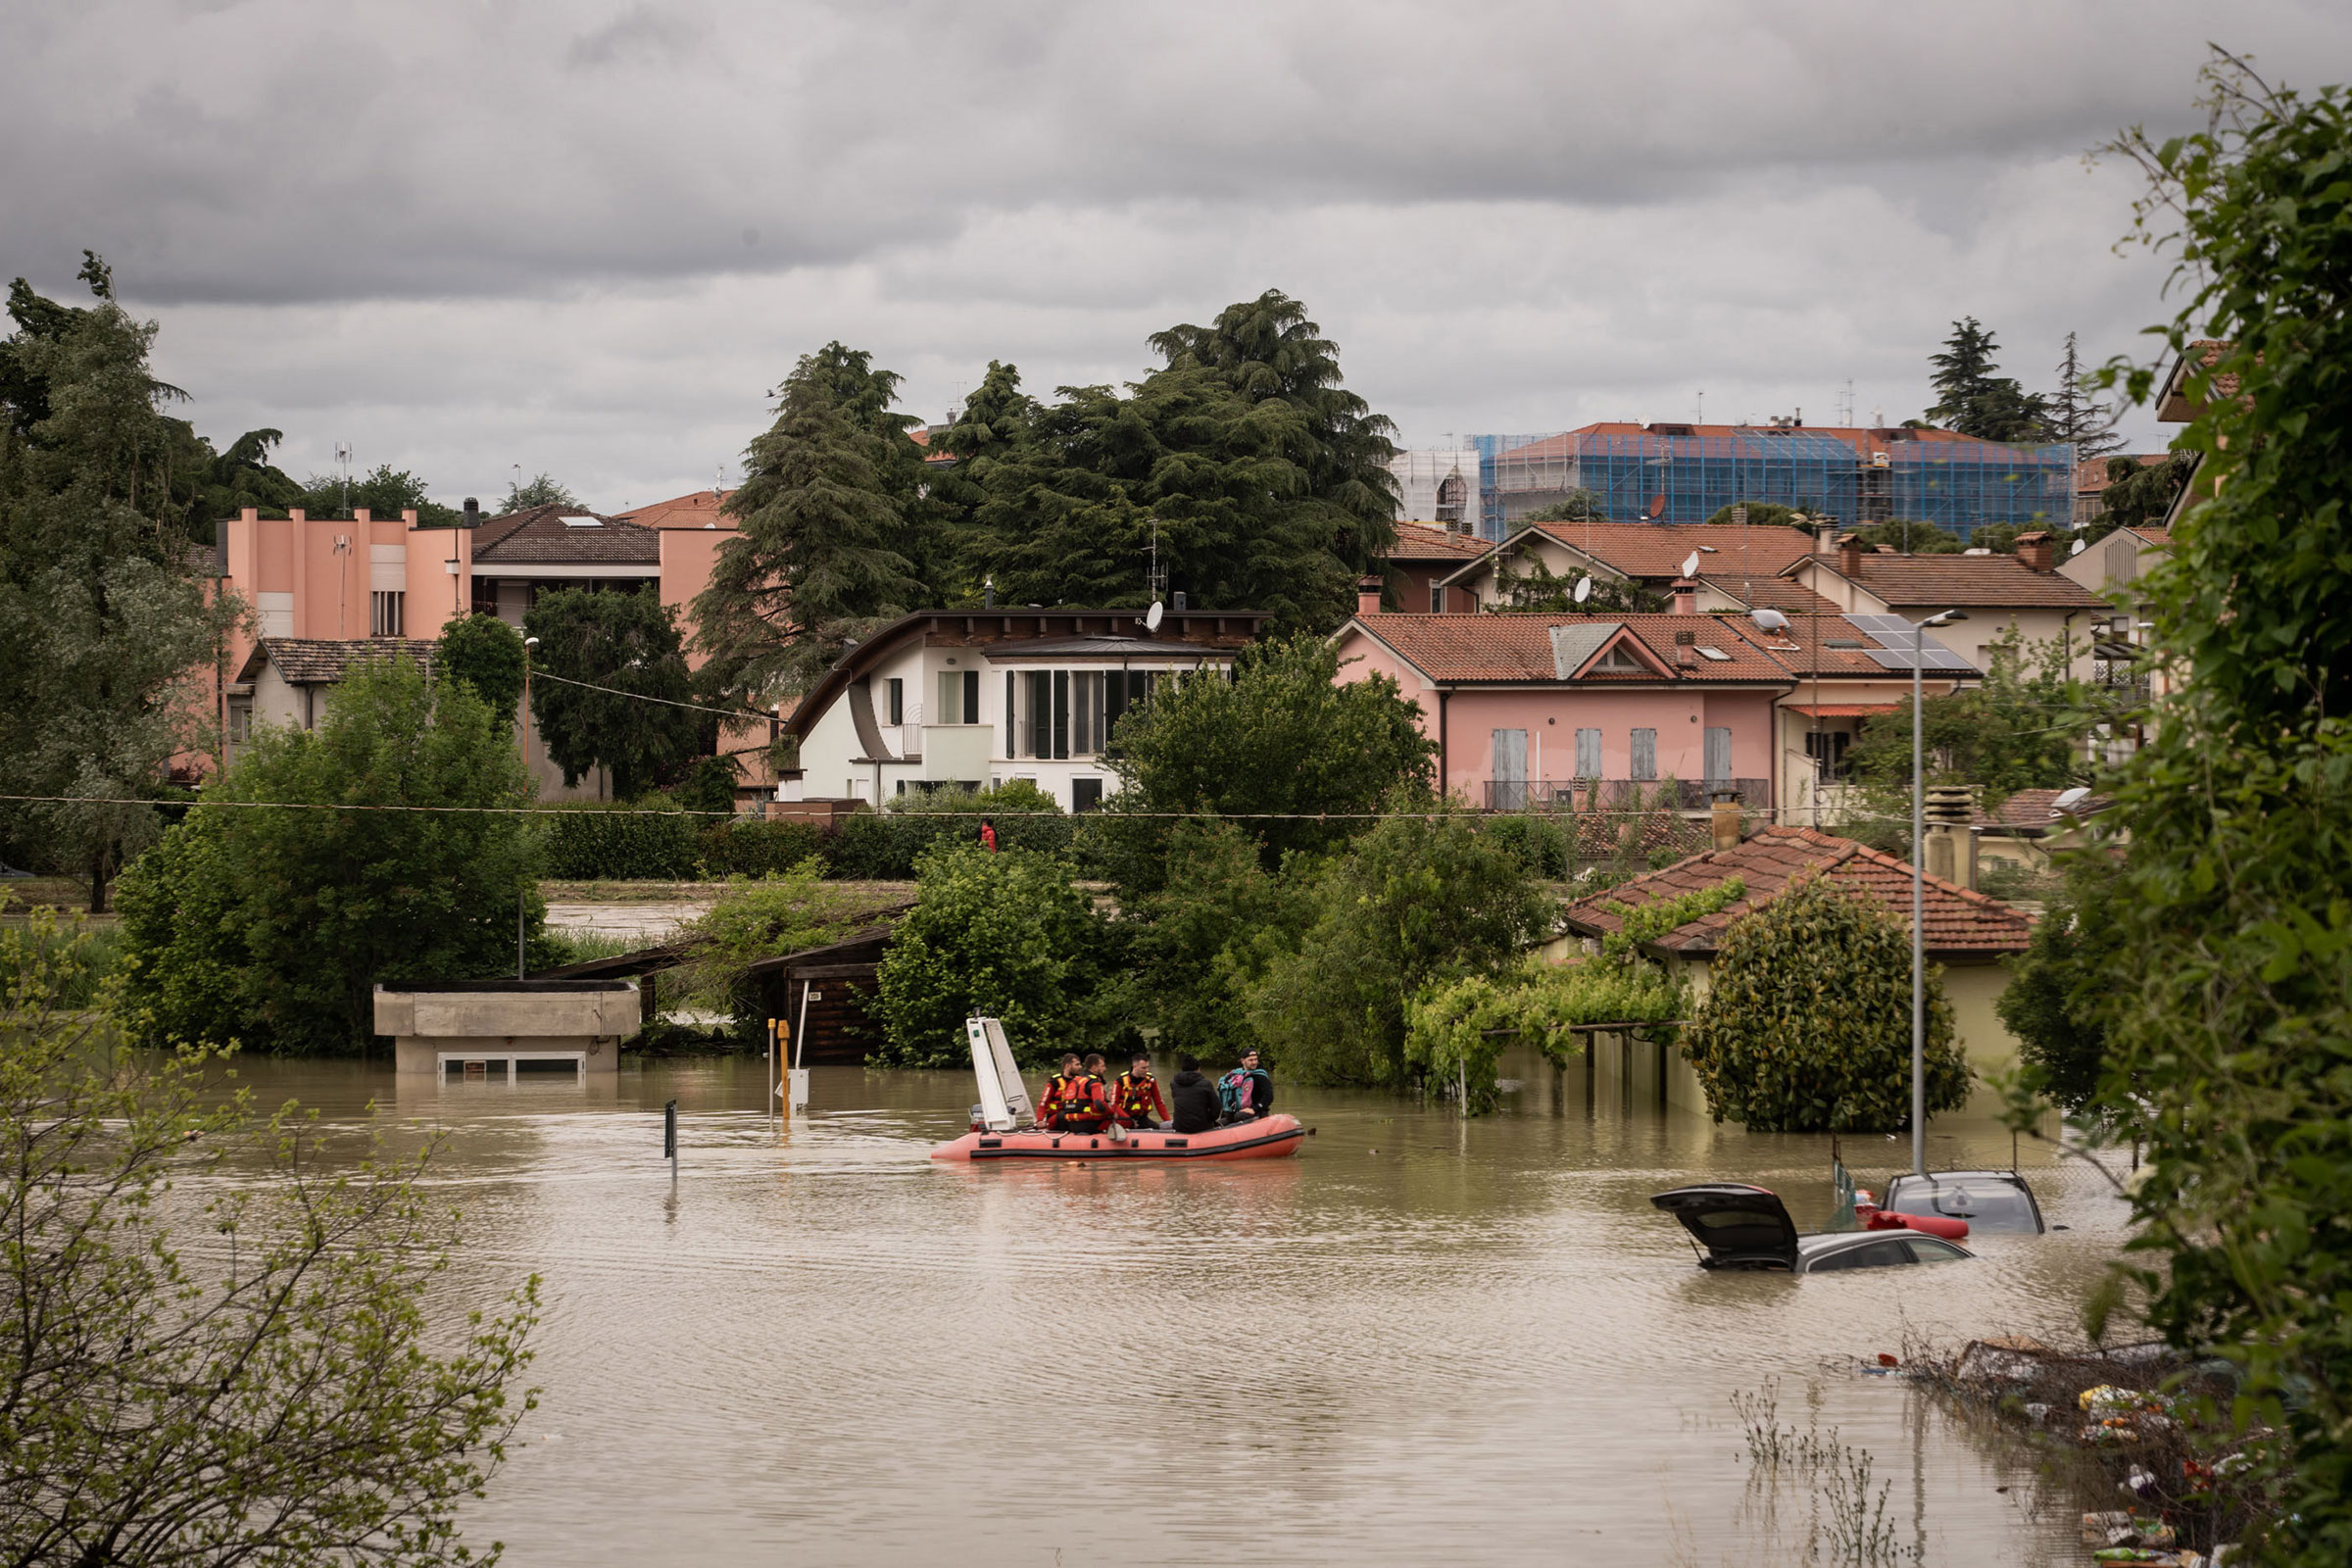 Rescue workrs help residents during the flooding in Cesena on May 17.